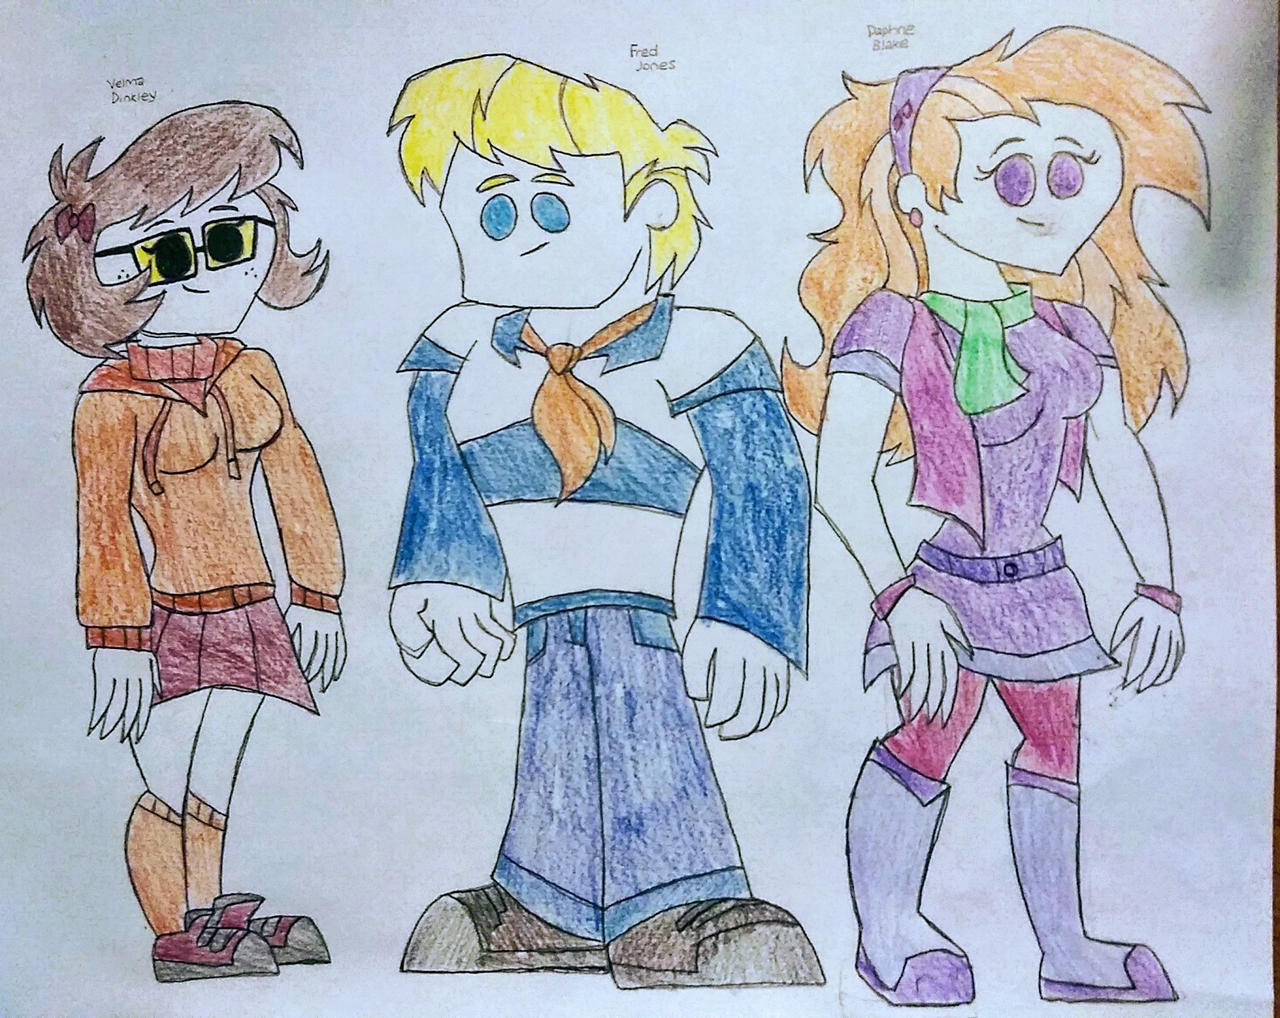 TSCOSD - Fred, Velma and Daphne by CyberEman2099 on DeviantArt